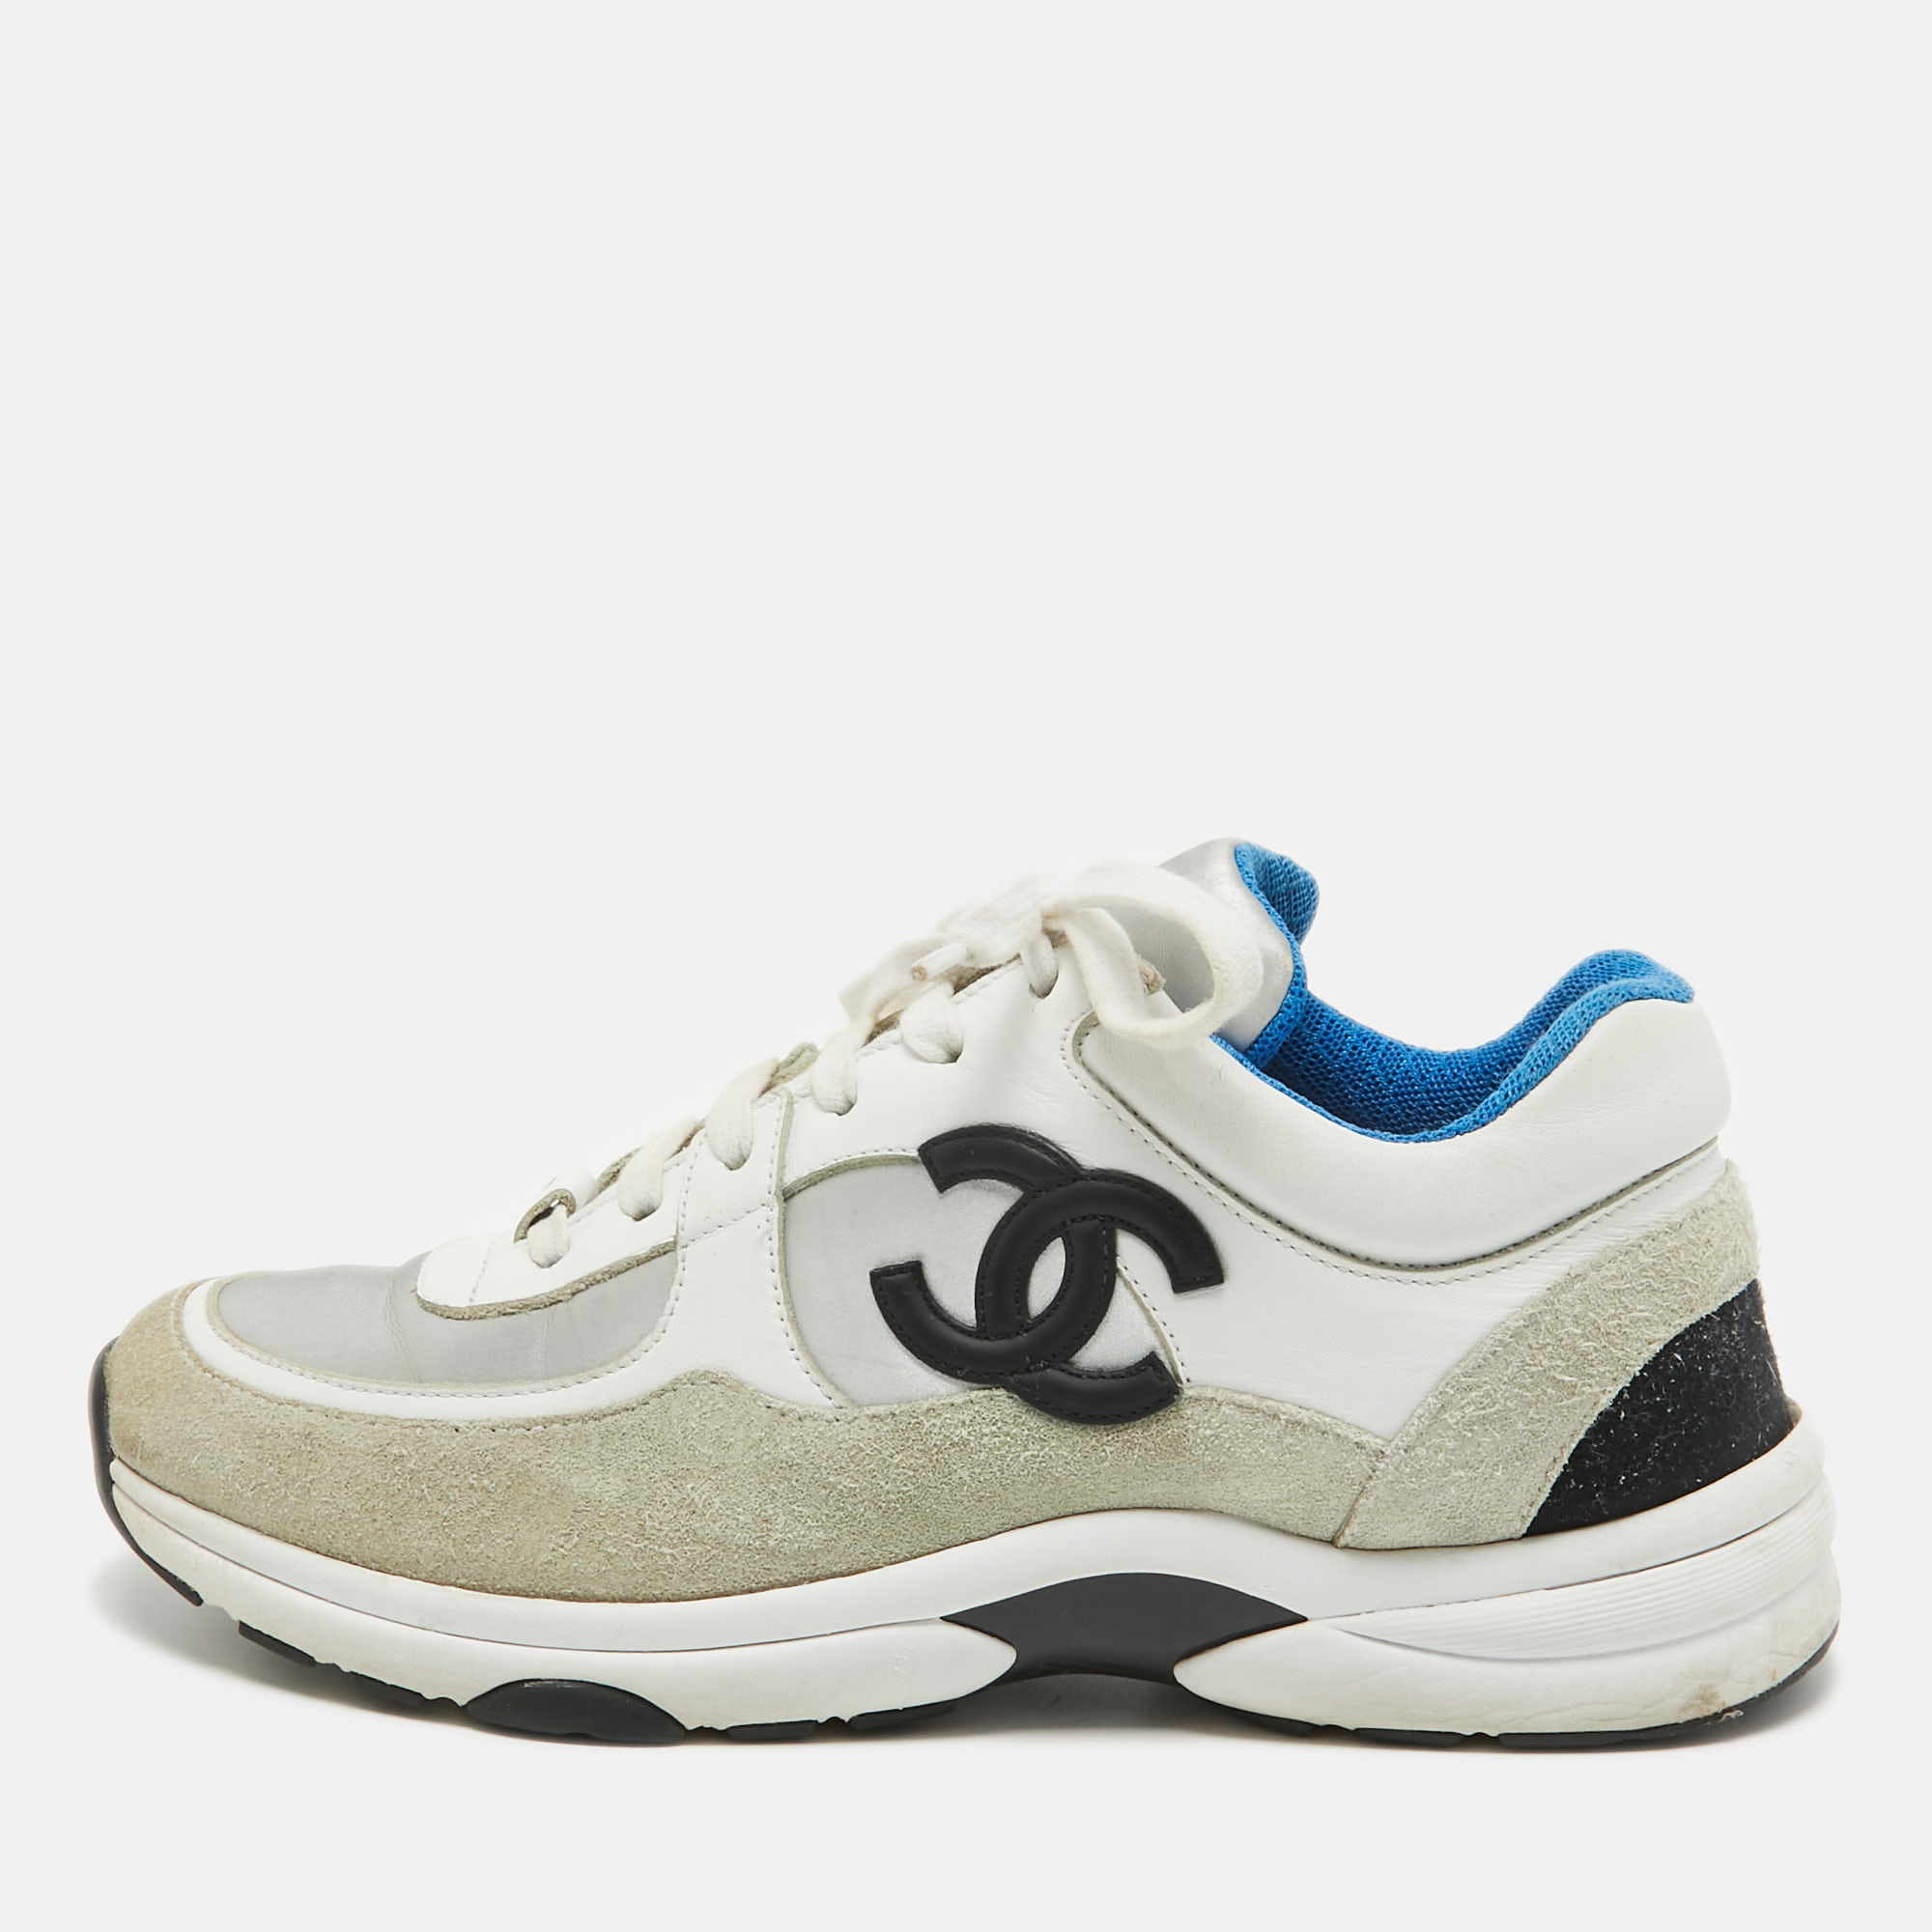 Coming in a classic silhouette these Chanel womens sneakers are a seamless combination of luxury comfort and style. These sneakers are designed with signature details and comfortable insoles.